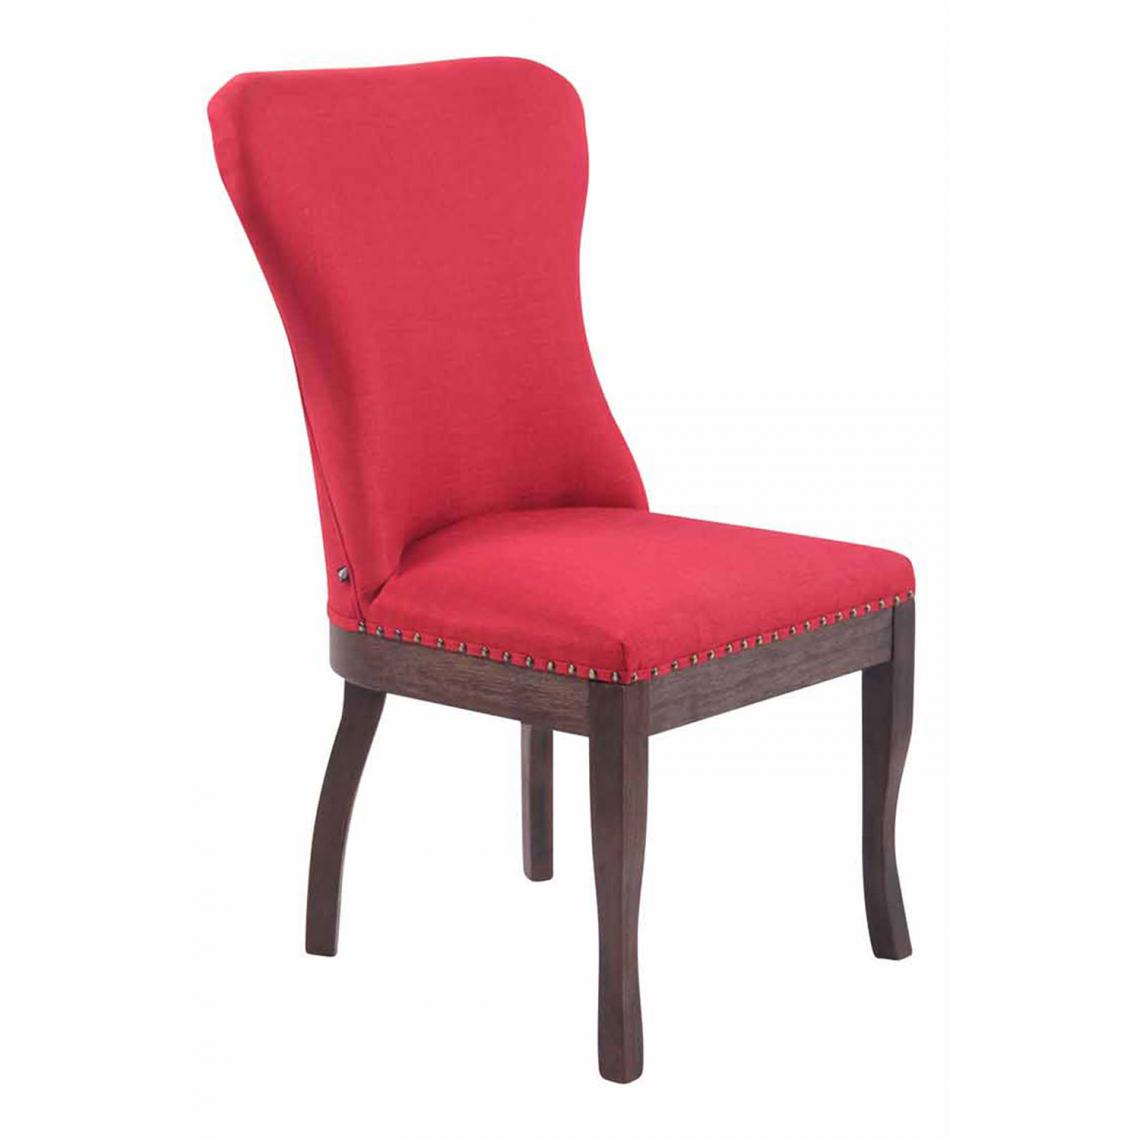 Icaverne - Inedit Chaise en tissu collection Pyongyang couleur rouge - Chaises